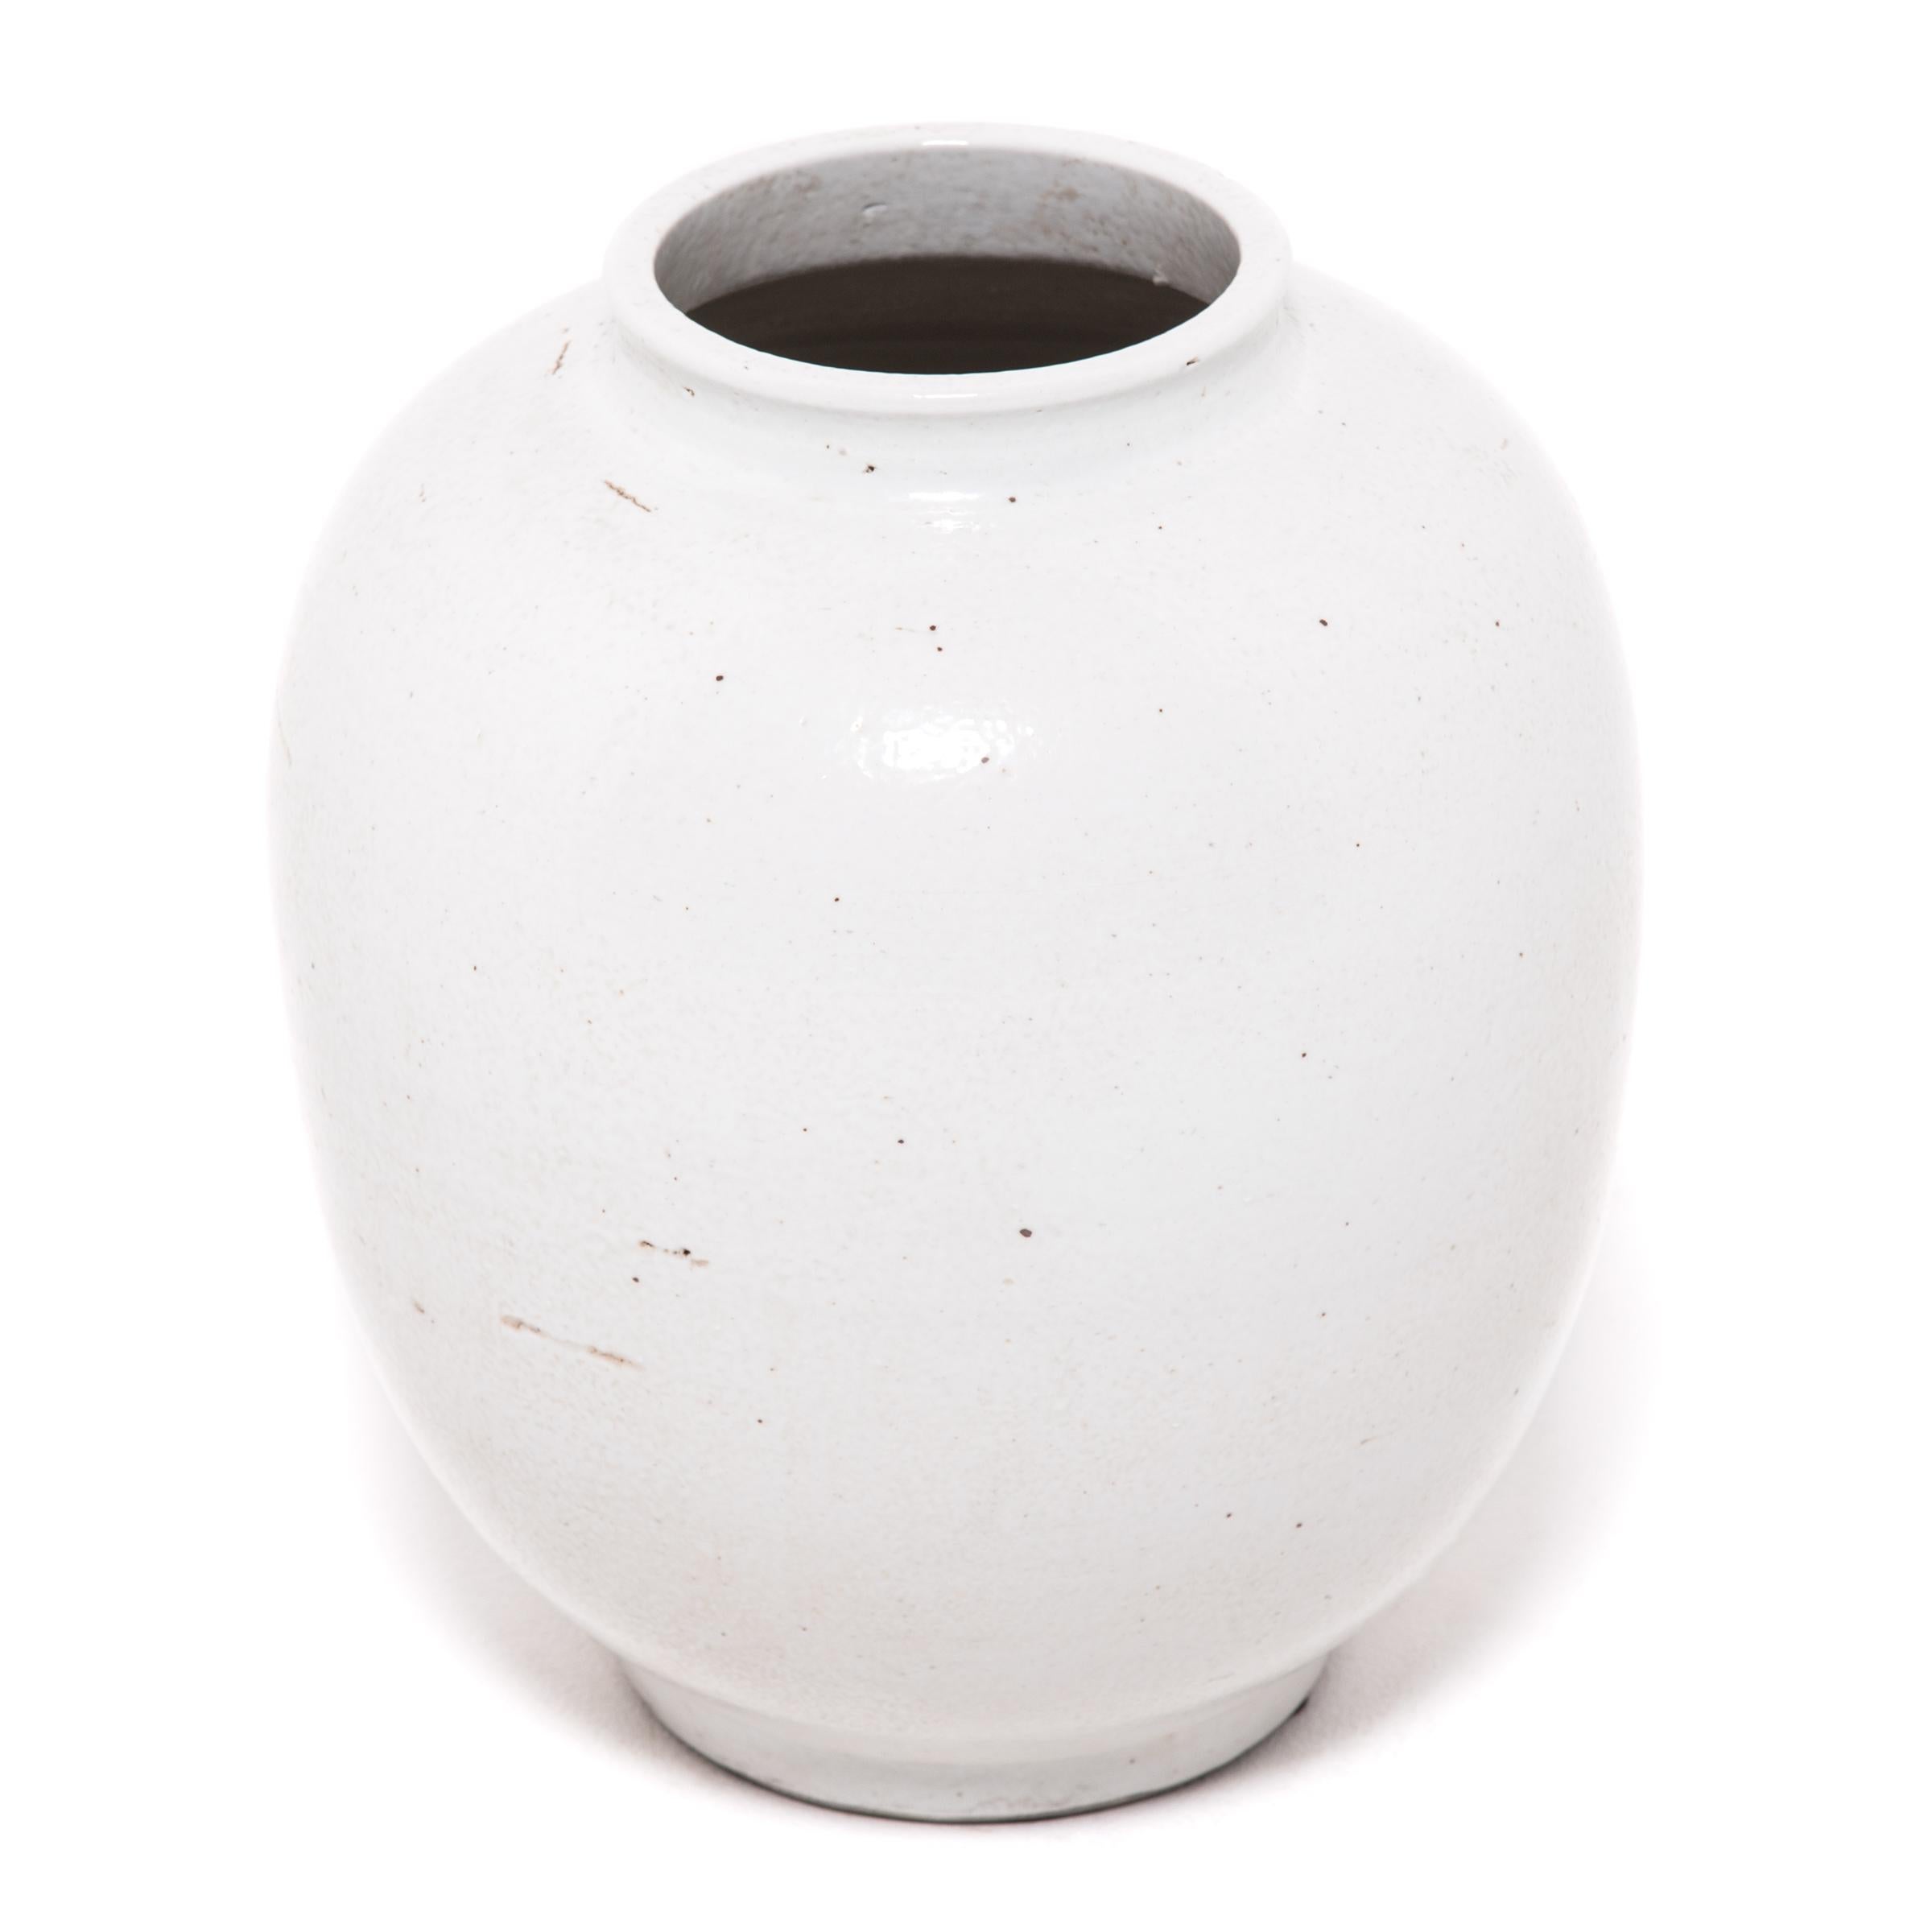 A milky white glaze emphasizes the simple, serene beauty of this contemporary ceramic. Refining the traditional onion shape, the jar has clean lines and an understated sculptural presence.